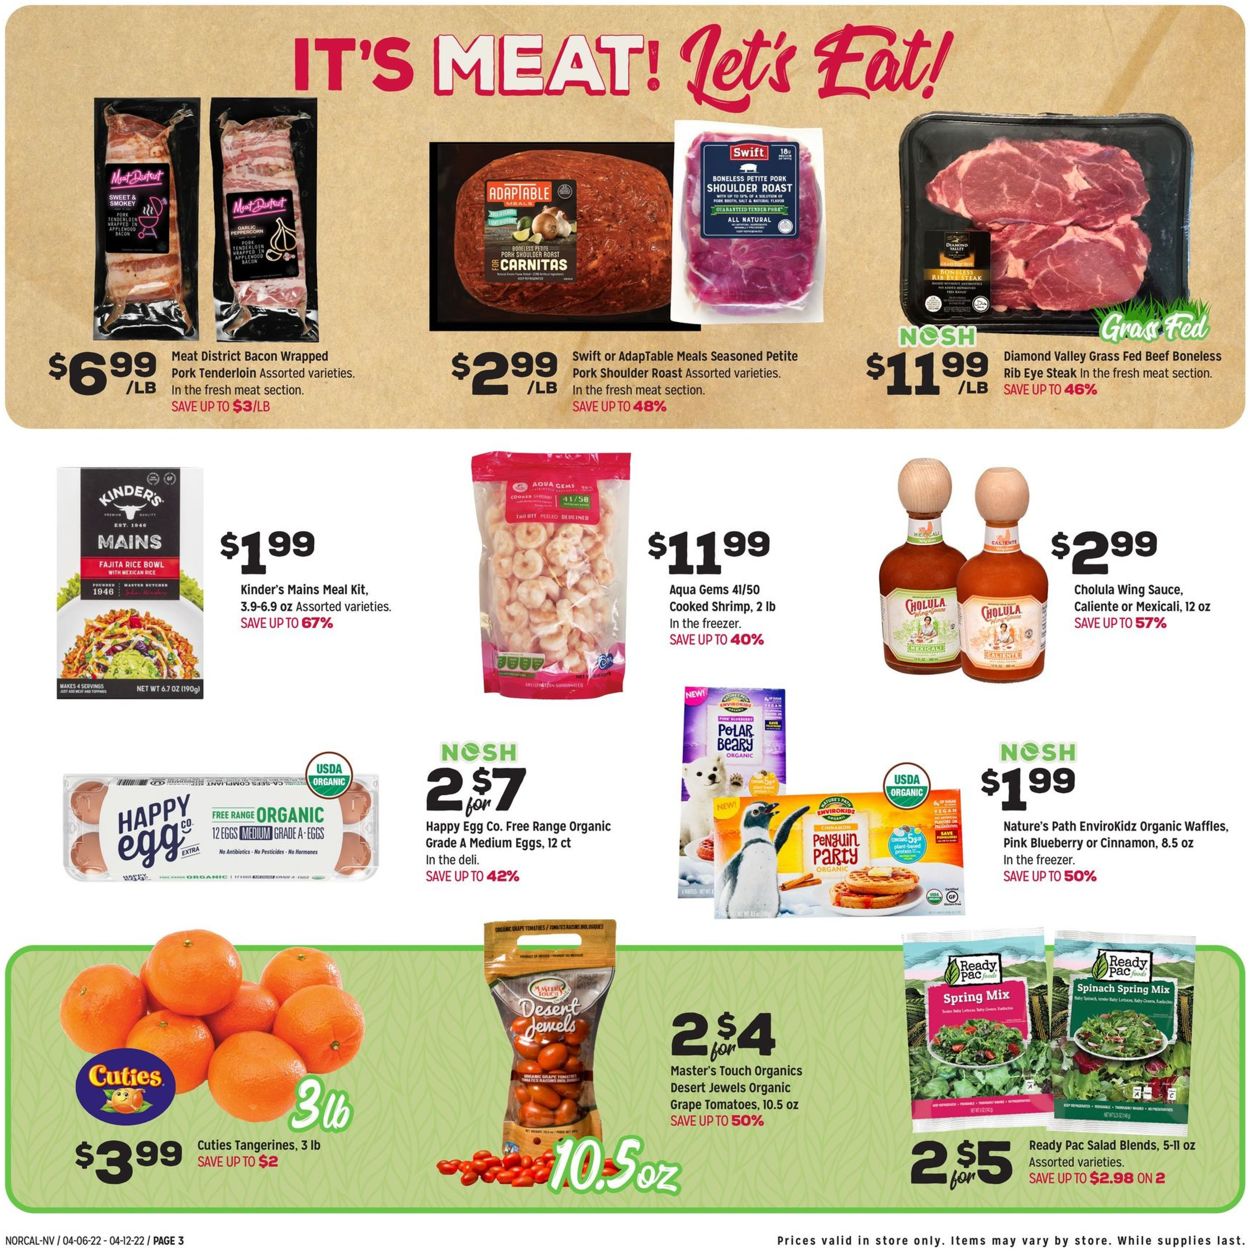 Grocery Outlet EASTER 2022 Weekly Ad Circular - valid 04/06-04/12/2022 (Page 4)